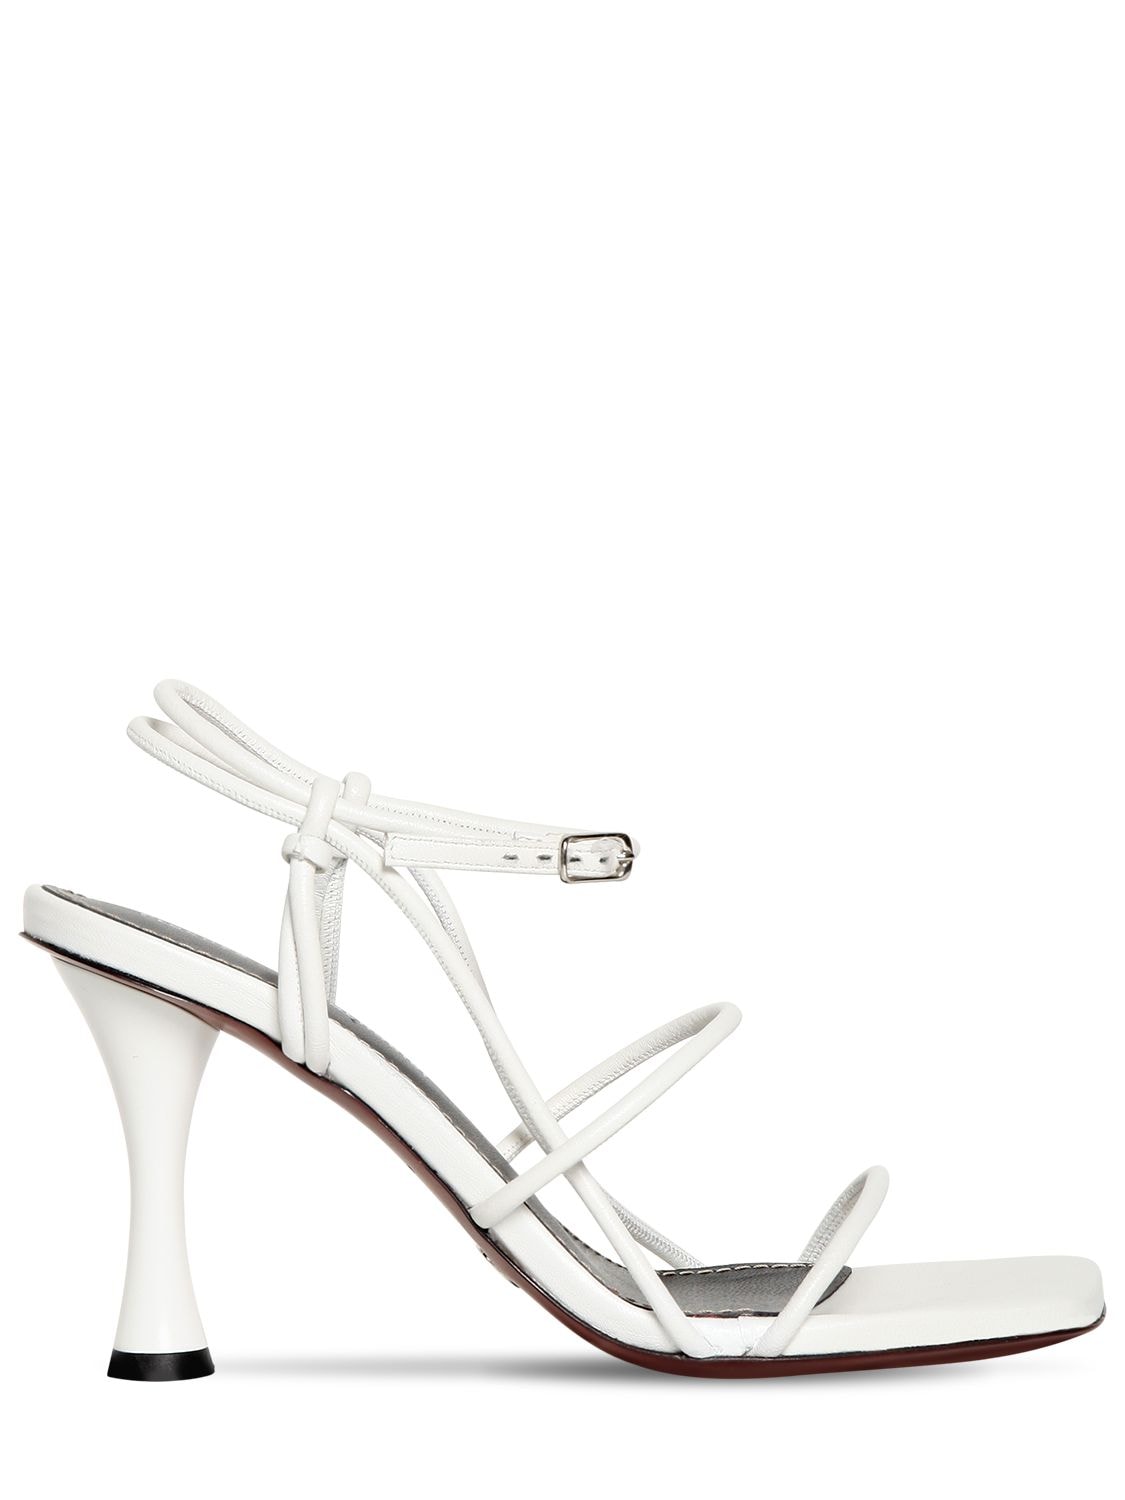 Proenza Schouler Strappy Leather High Heel Sandals In White